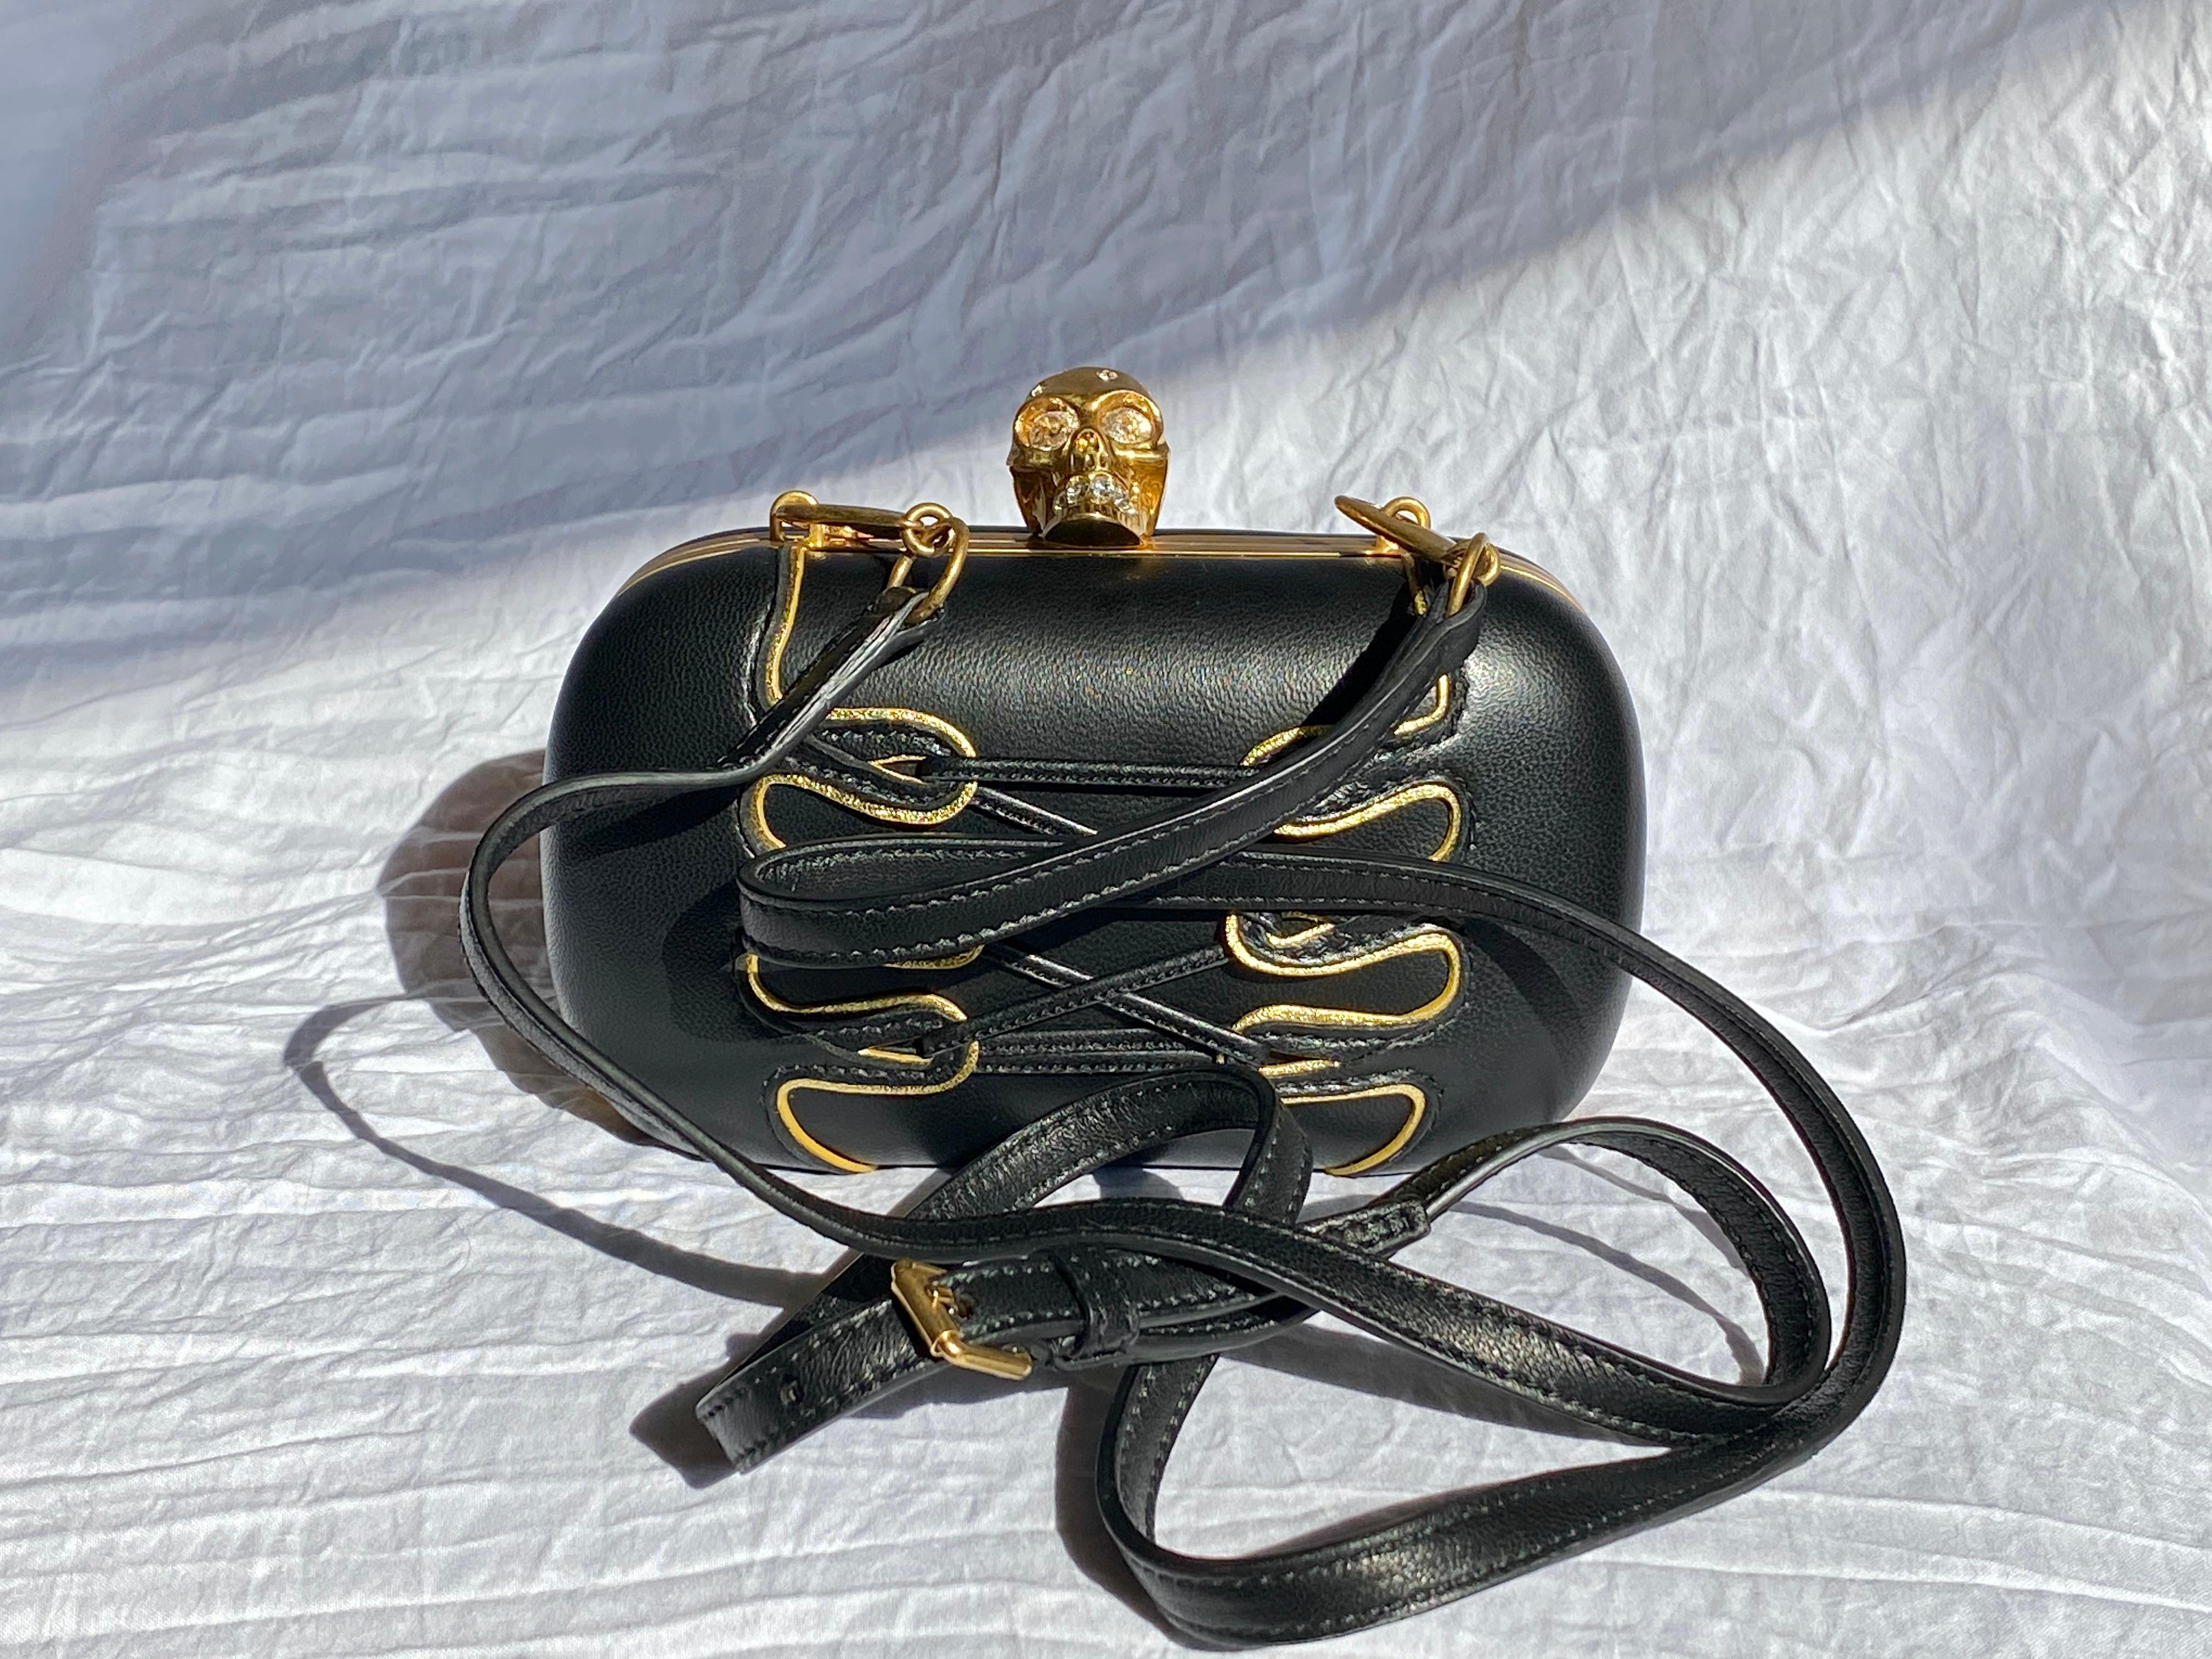 Alexander McQueen Corset Skull Box Clutch with strap In Good Condition For Sale In Annapolis, MD